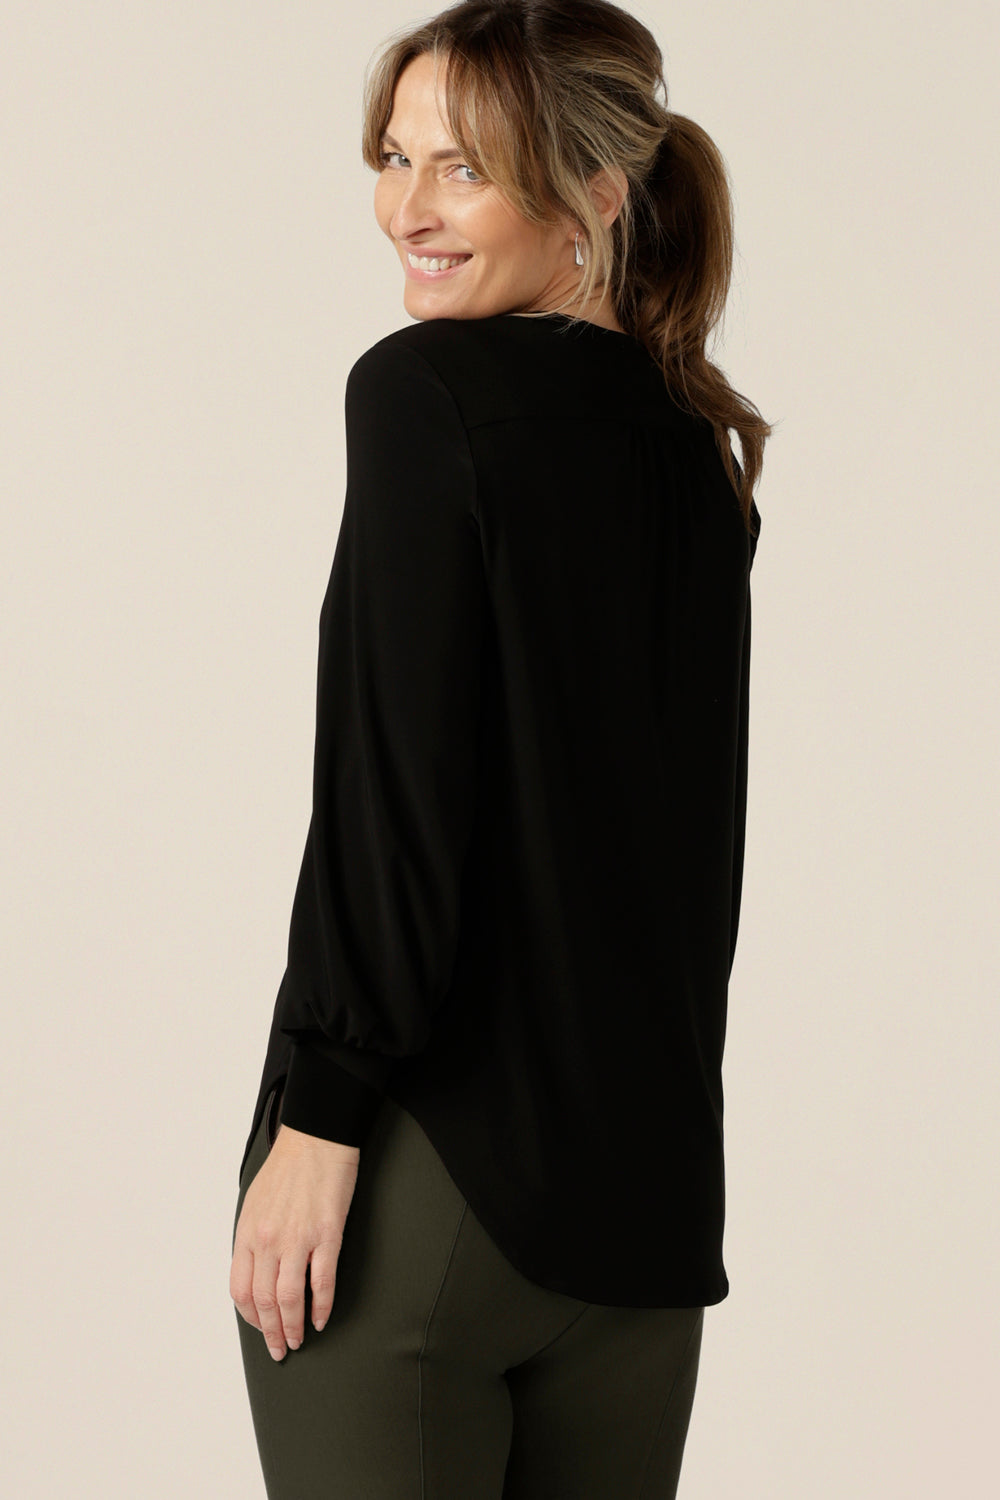 Back view of a size 10 woman wearing a V-neck black top with long sleeves. This long sleeved top features cuffs at the wrists and a shirttail hemline. Made in Australia by Australian and New Zealand women's clothing label, L&F.